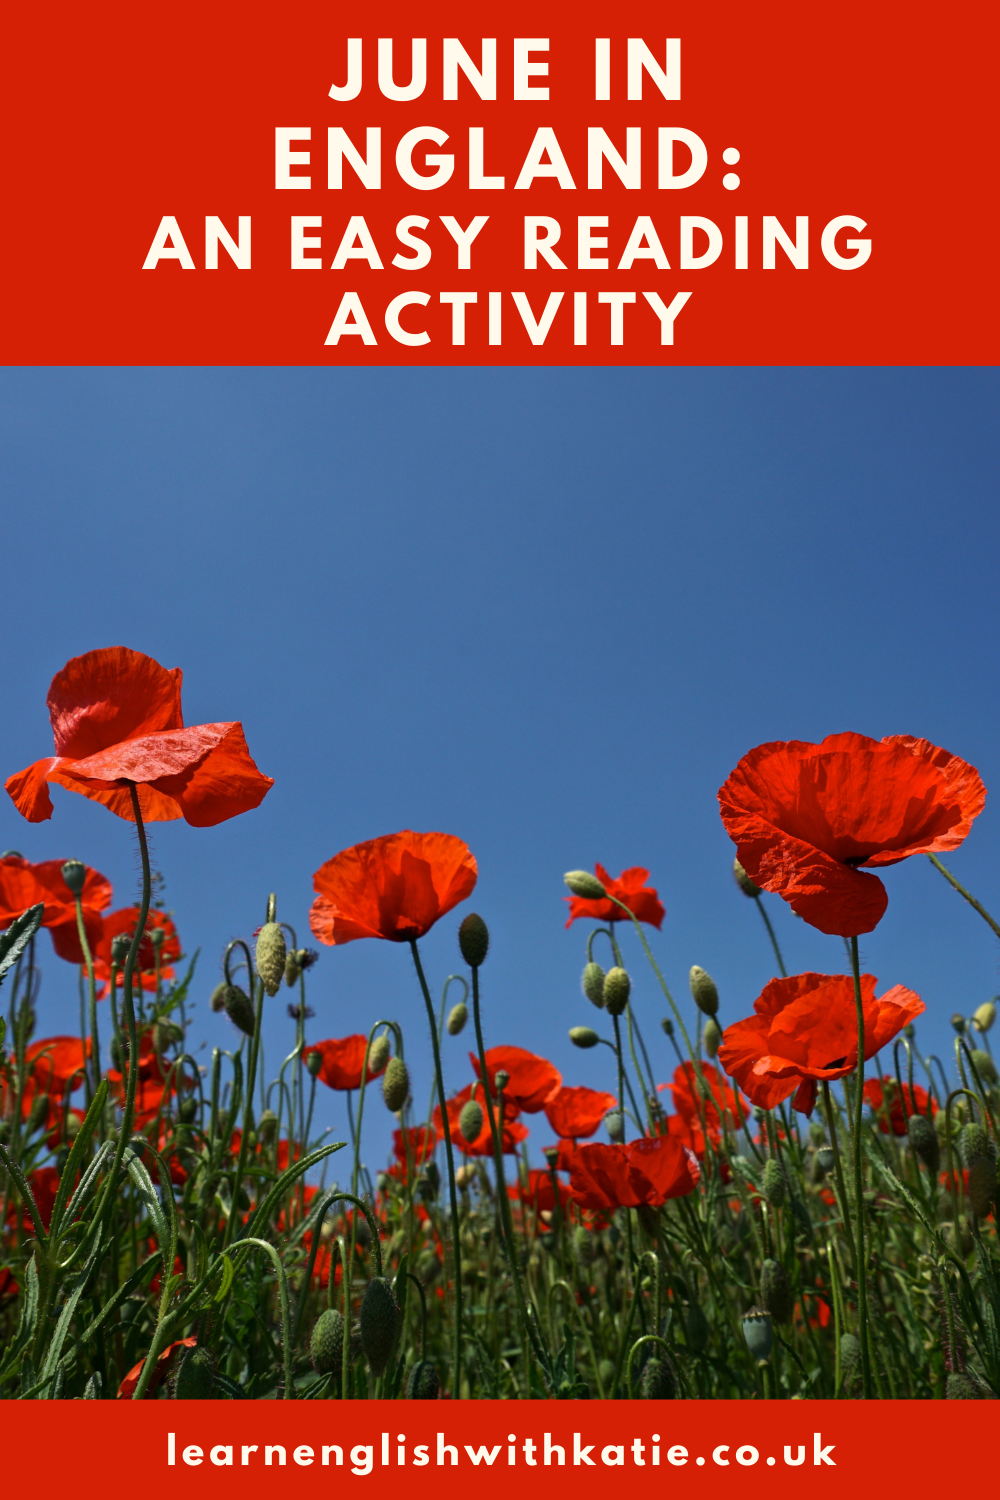 Pinnable image featuring red poppies